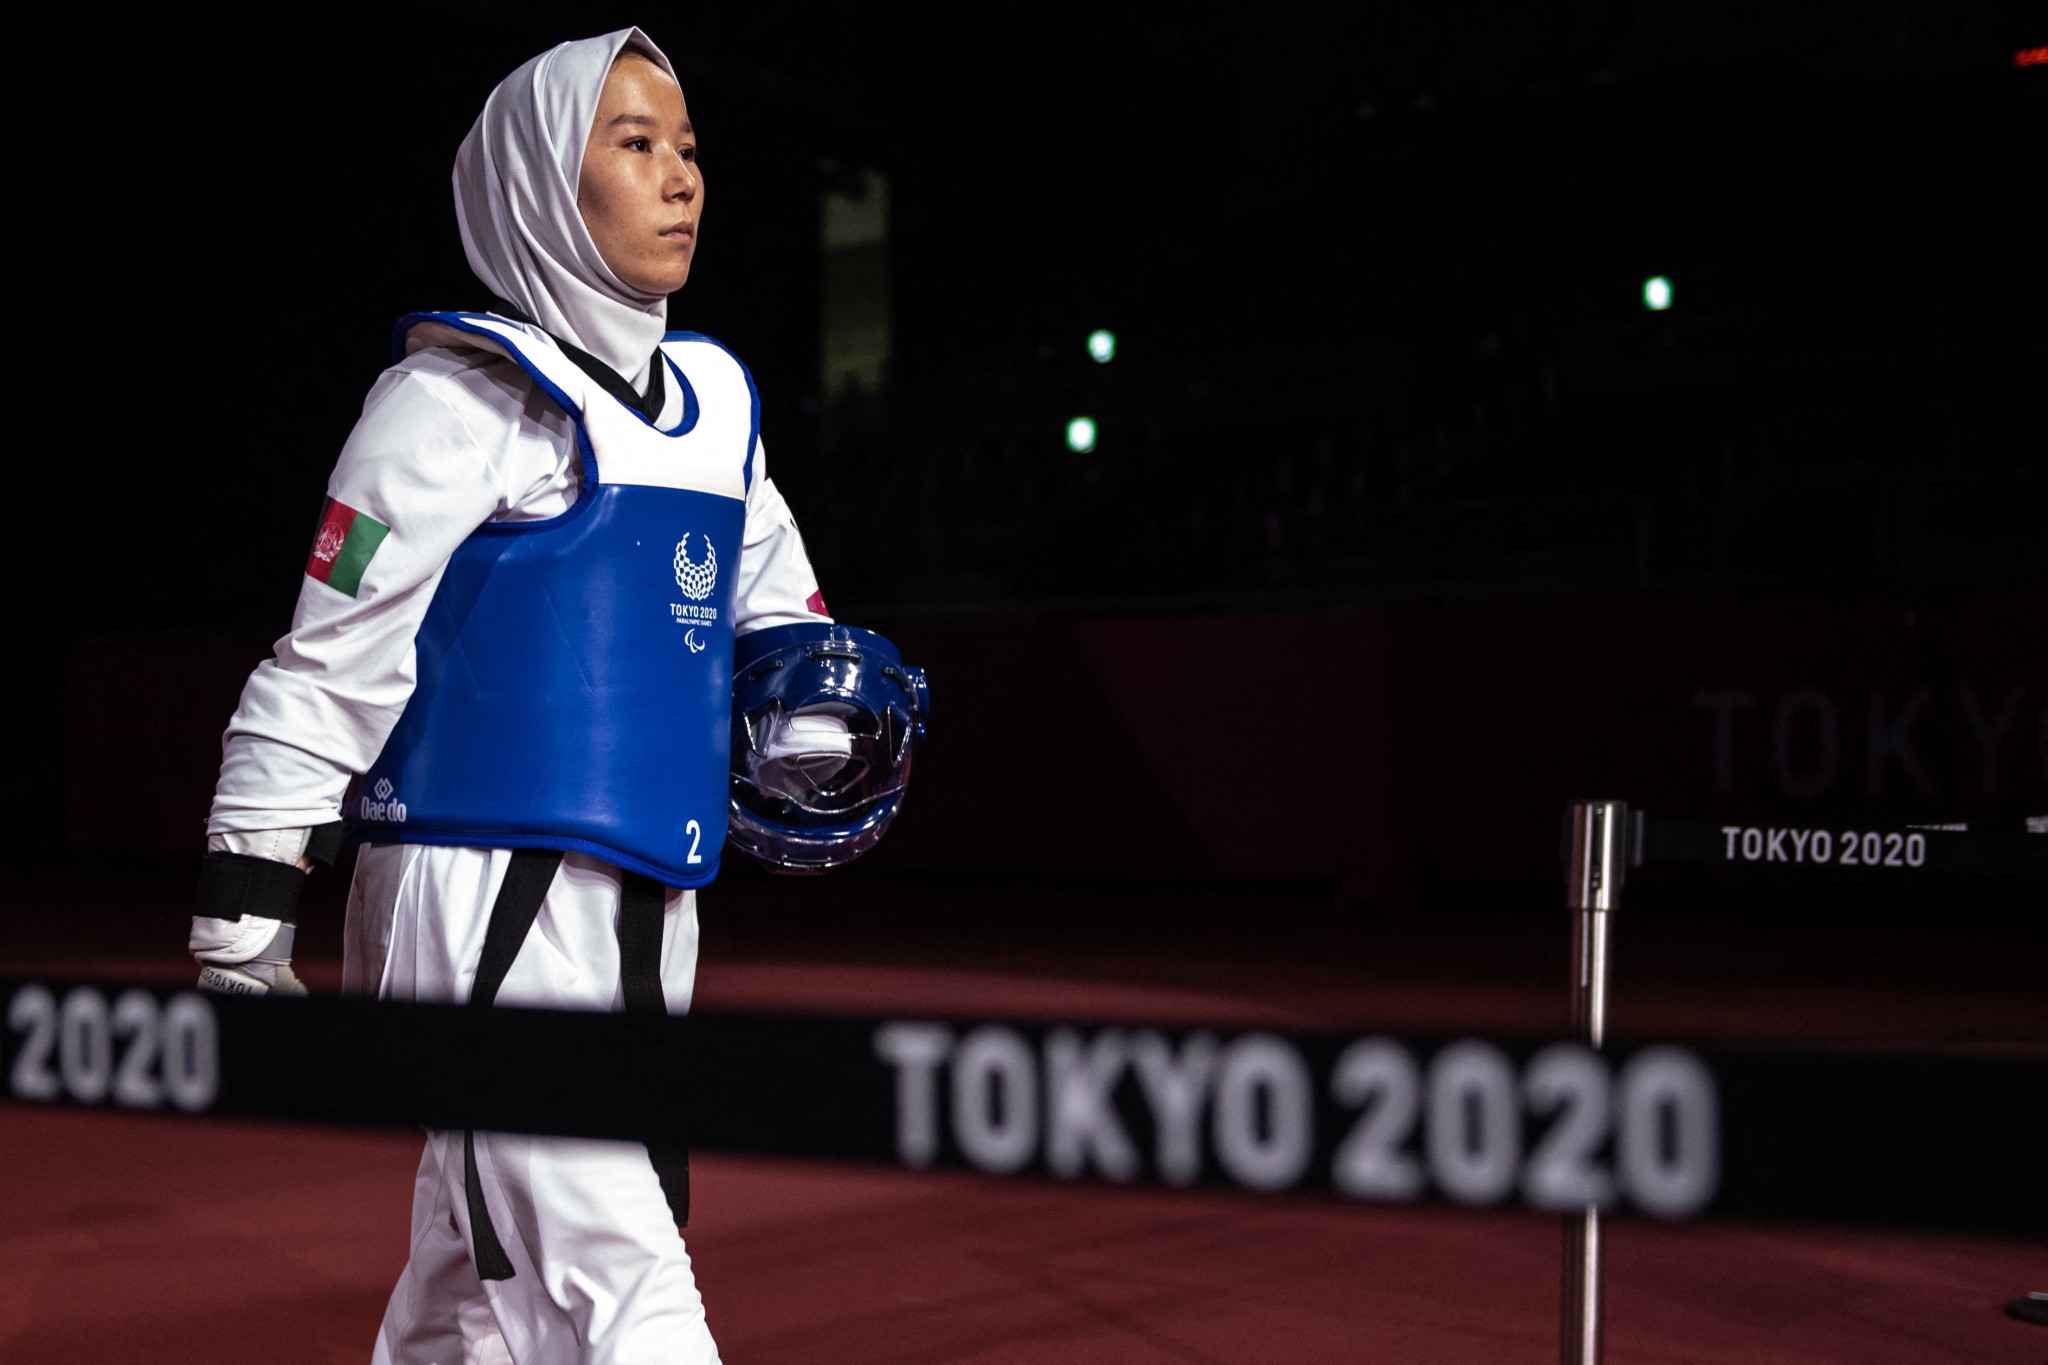 Taekwondo player Zakia Khudadadi competed in the women’s K44 under-49kg division at Tokyo 2020 ©Getty Images